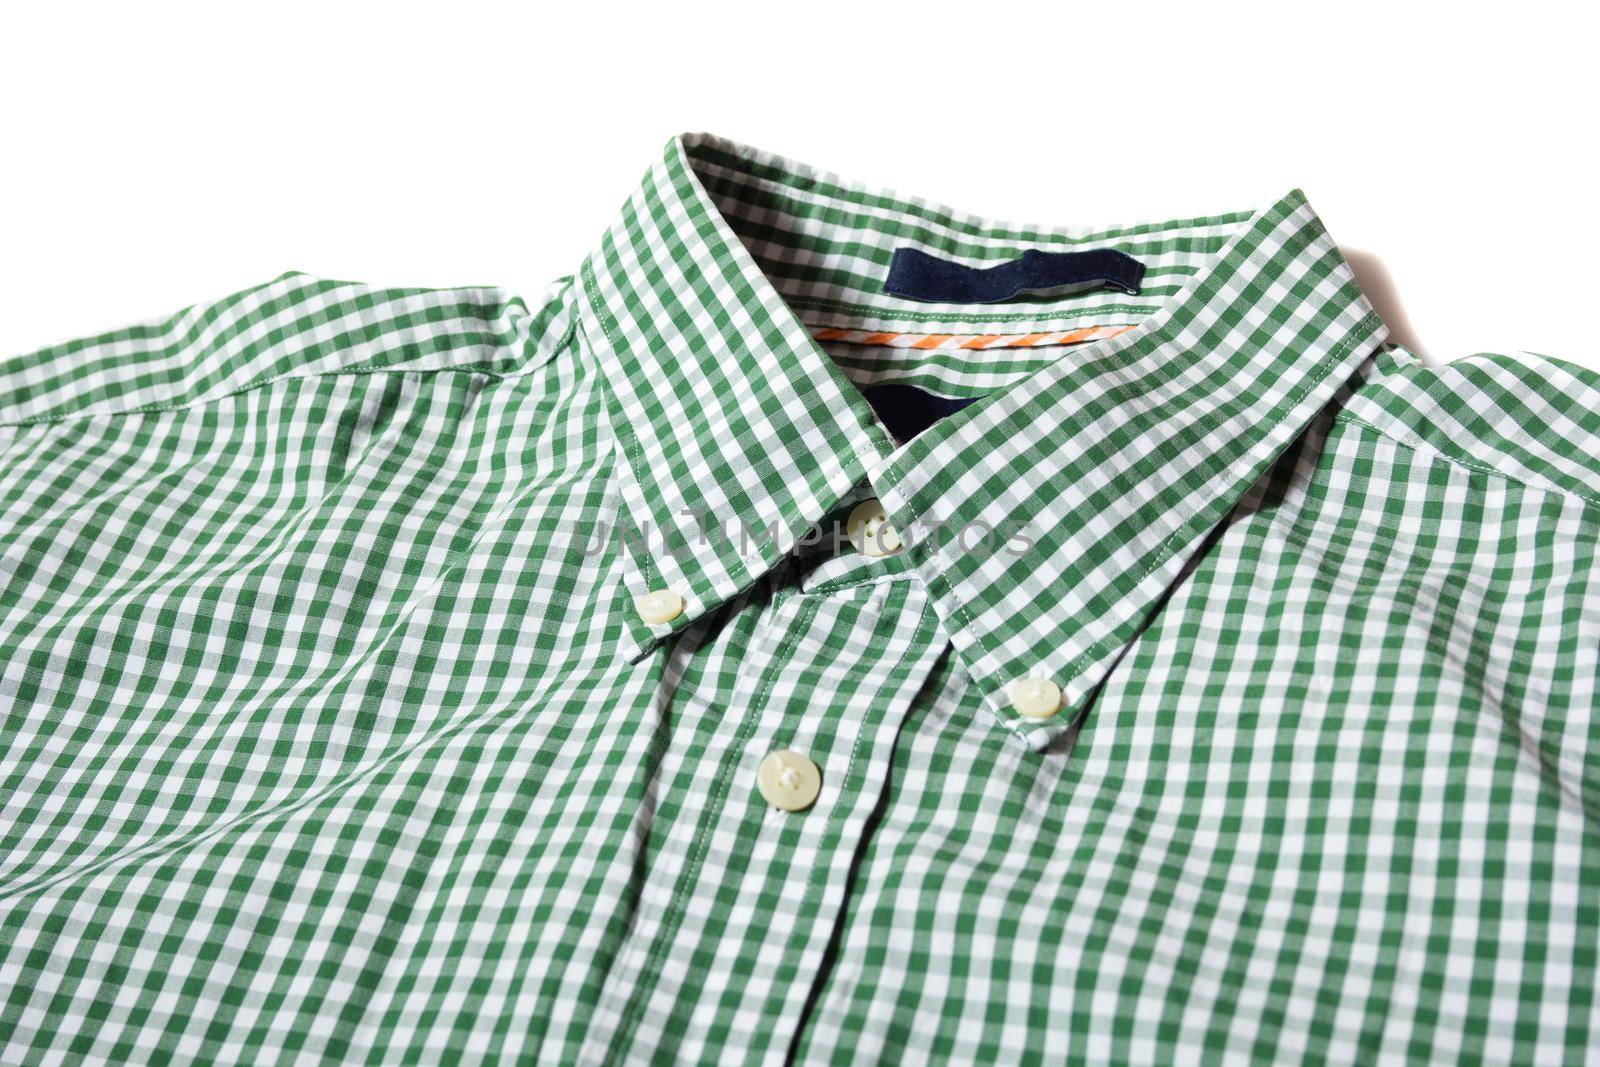 Green men's shirt with button down collar on white background